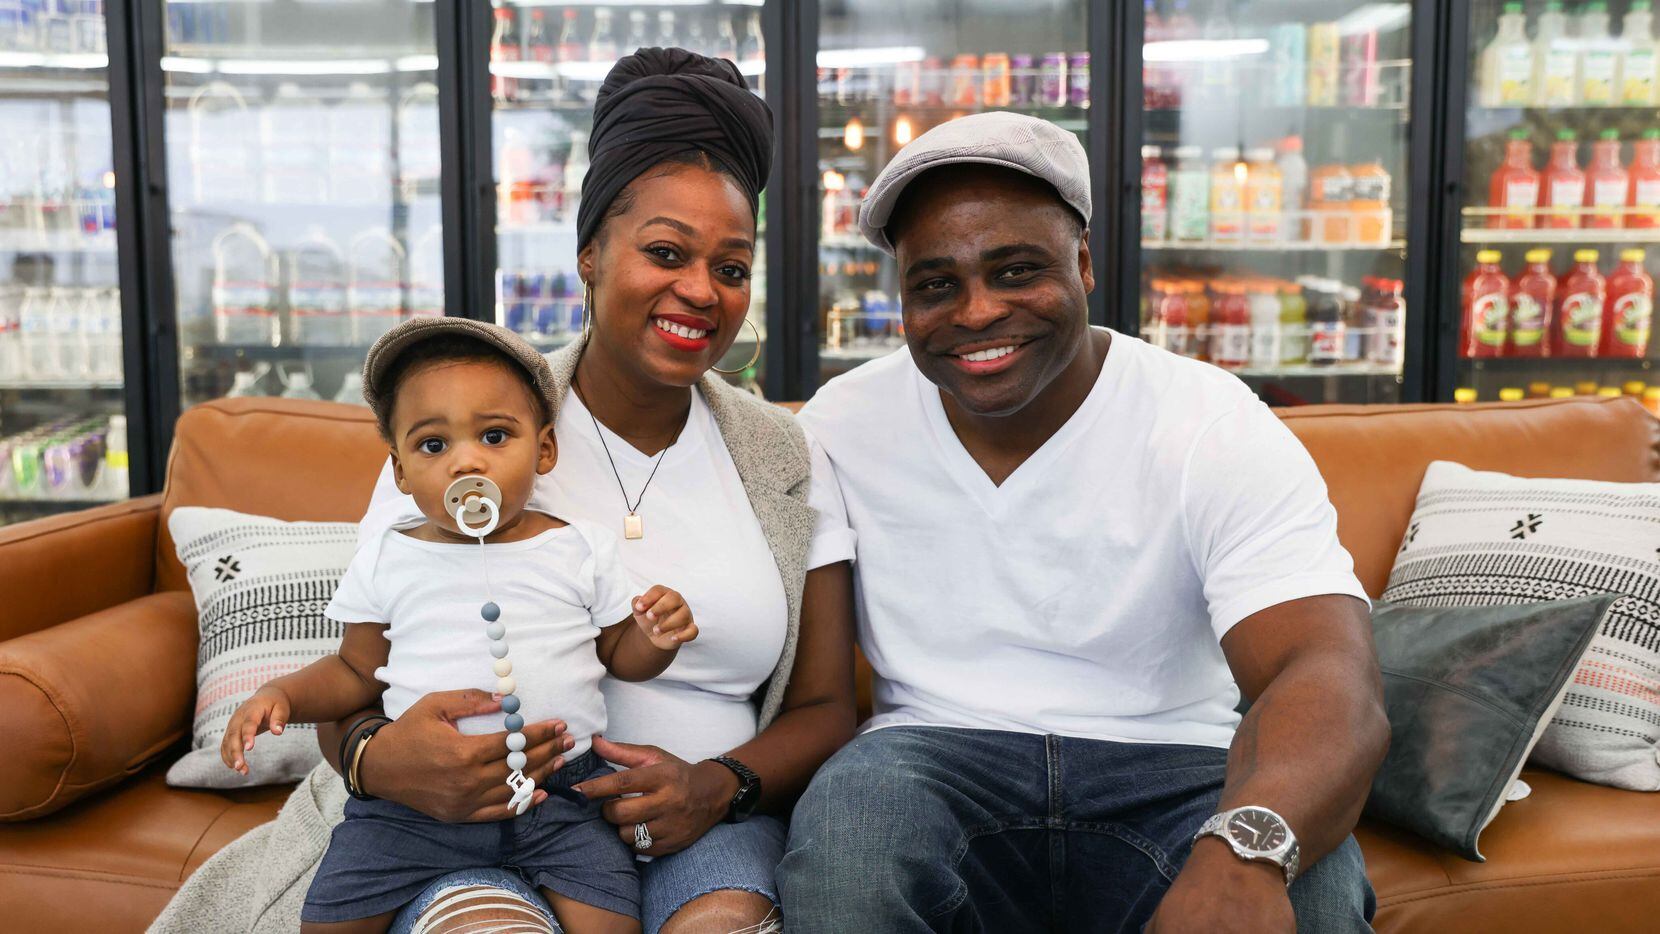 Eugene and LaToyah Vessel, with their son Eugene, pose together for a portrait at the Sweet Grass Market in Dallas.